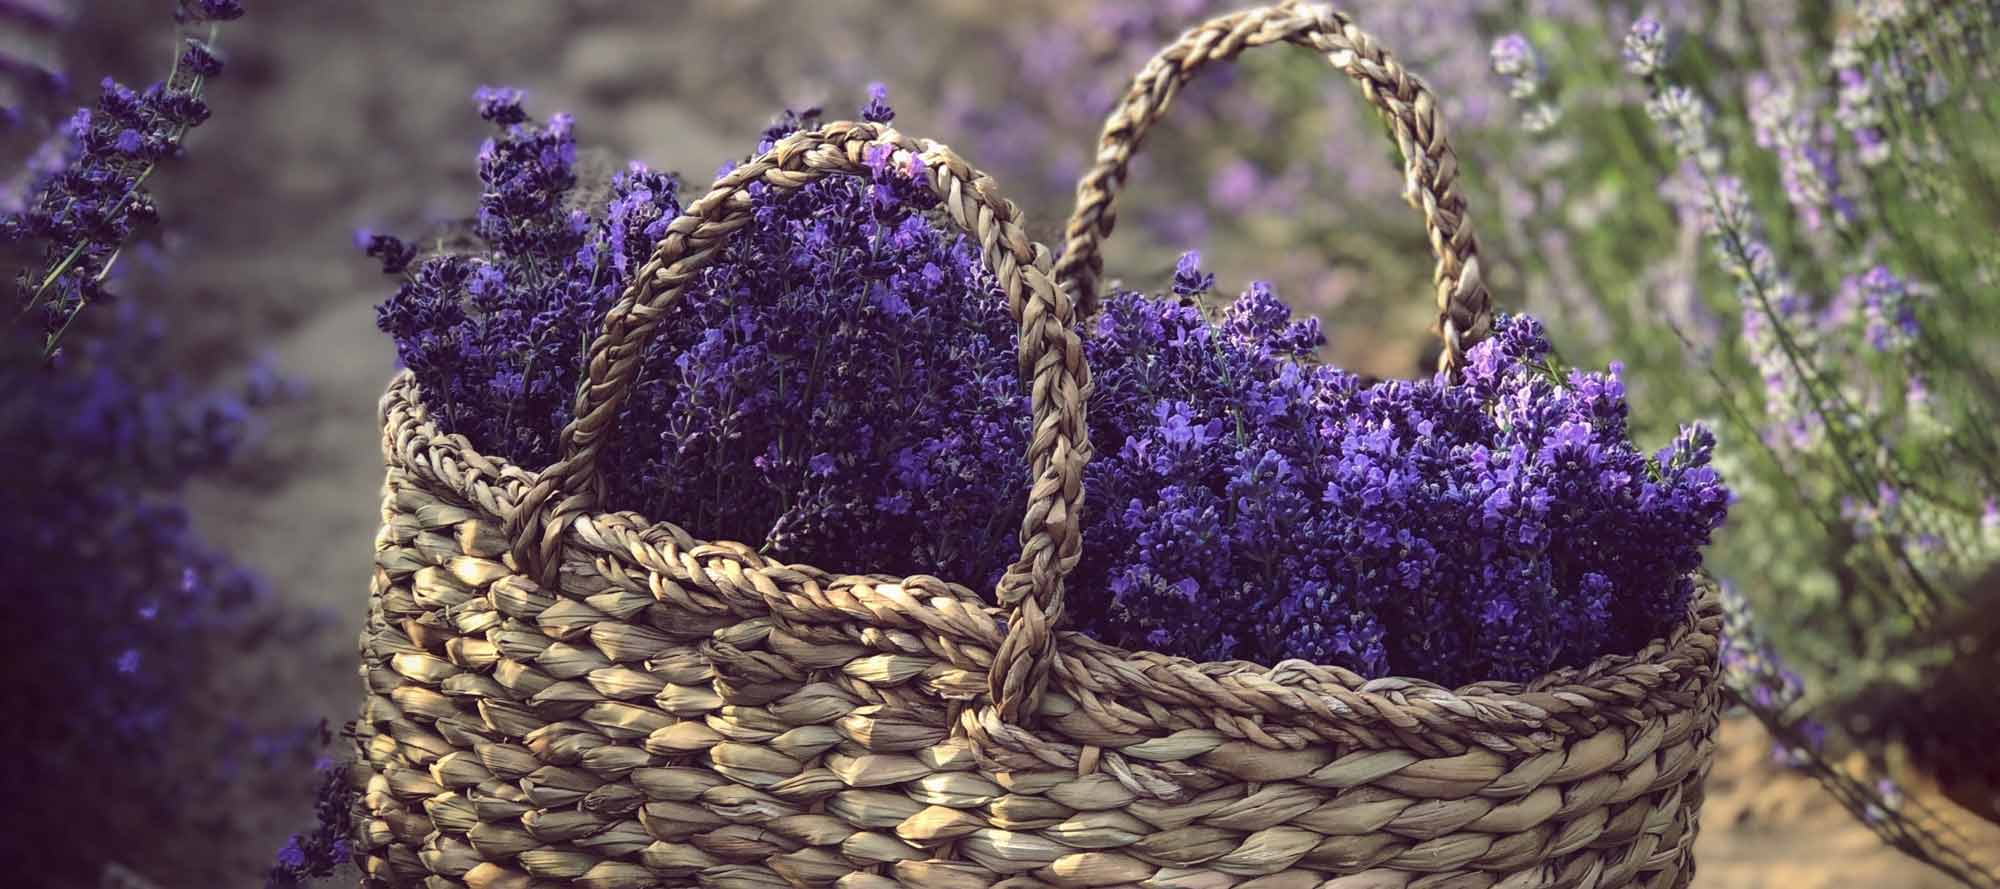 woven basket filled with fresh Lavender in a Lavender field